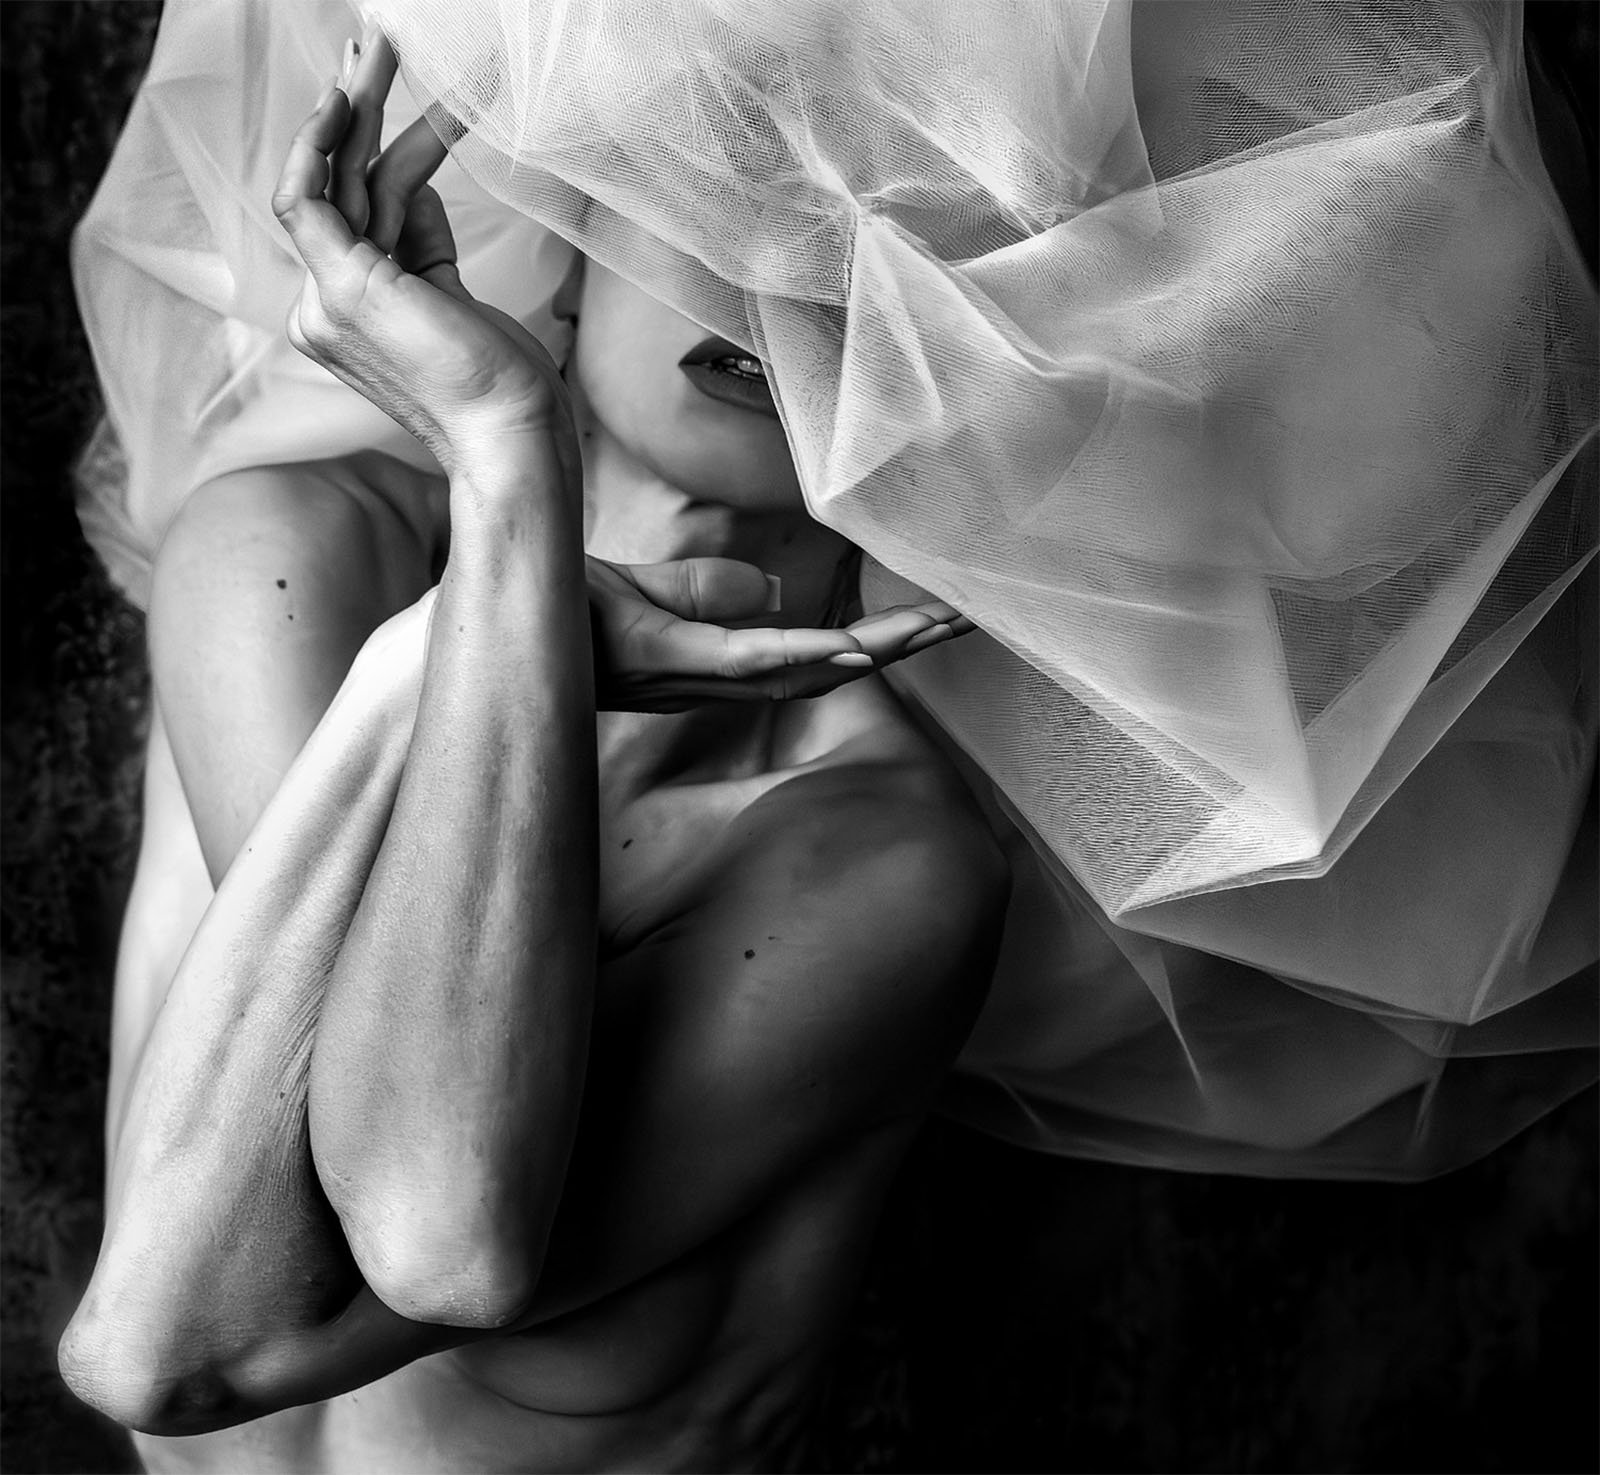 A black and white image of a person partially obscured by translucent fabric. The person's arms are artistically posed, with one hand near their face and the other extended upward. The texture and contrast of the fabric create an ethereal and evocative visual effect.